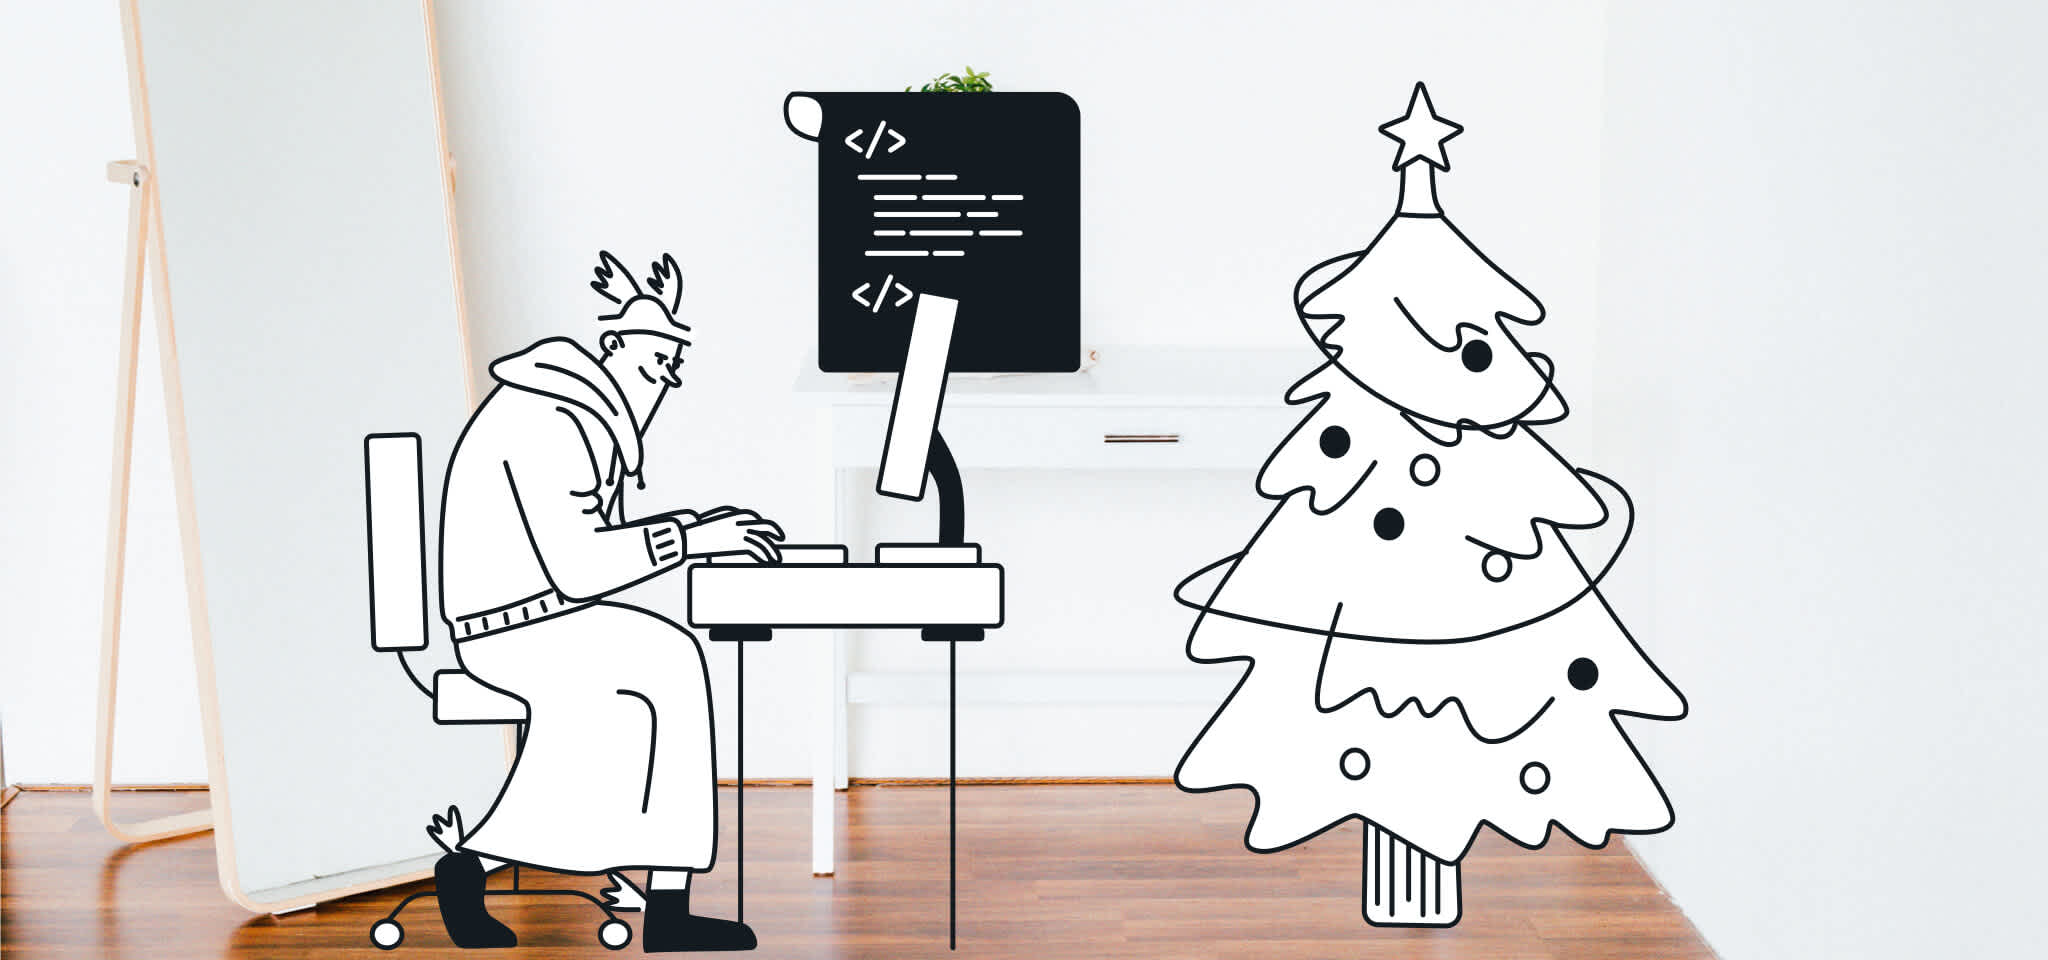 Hermes typing in a room with a Christmas tree